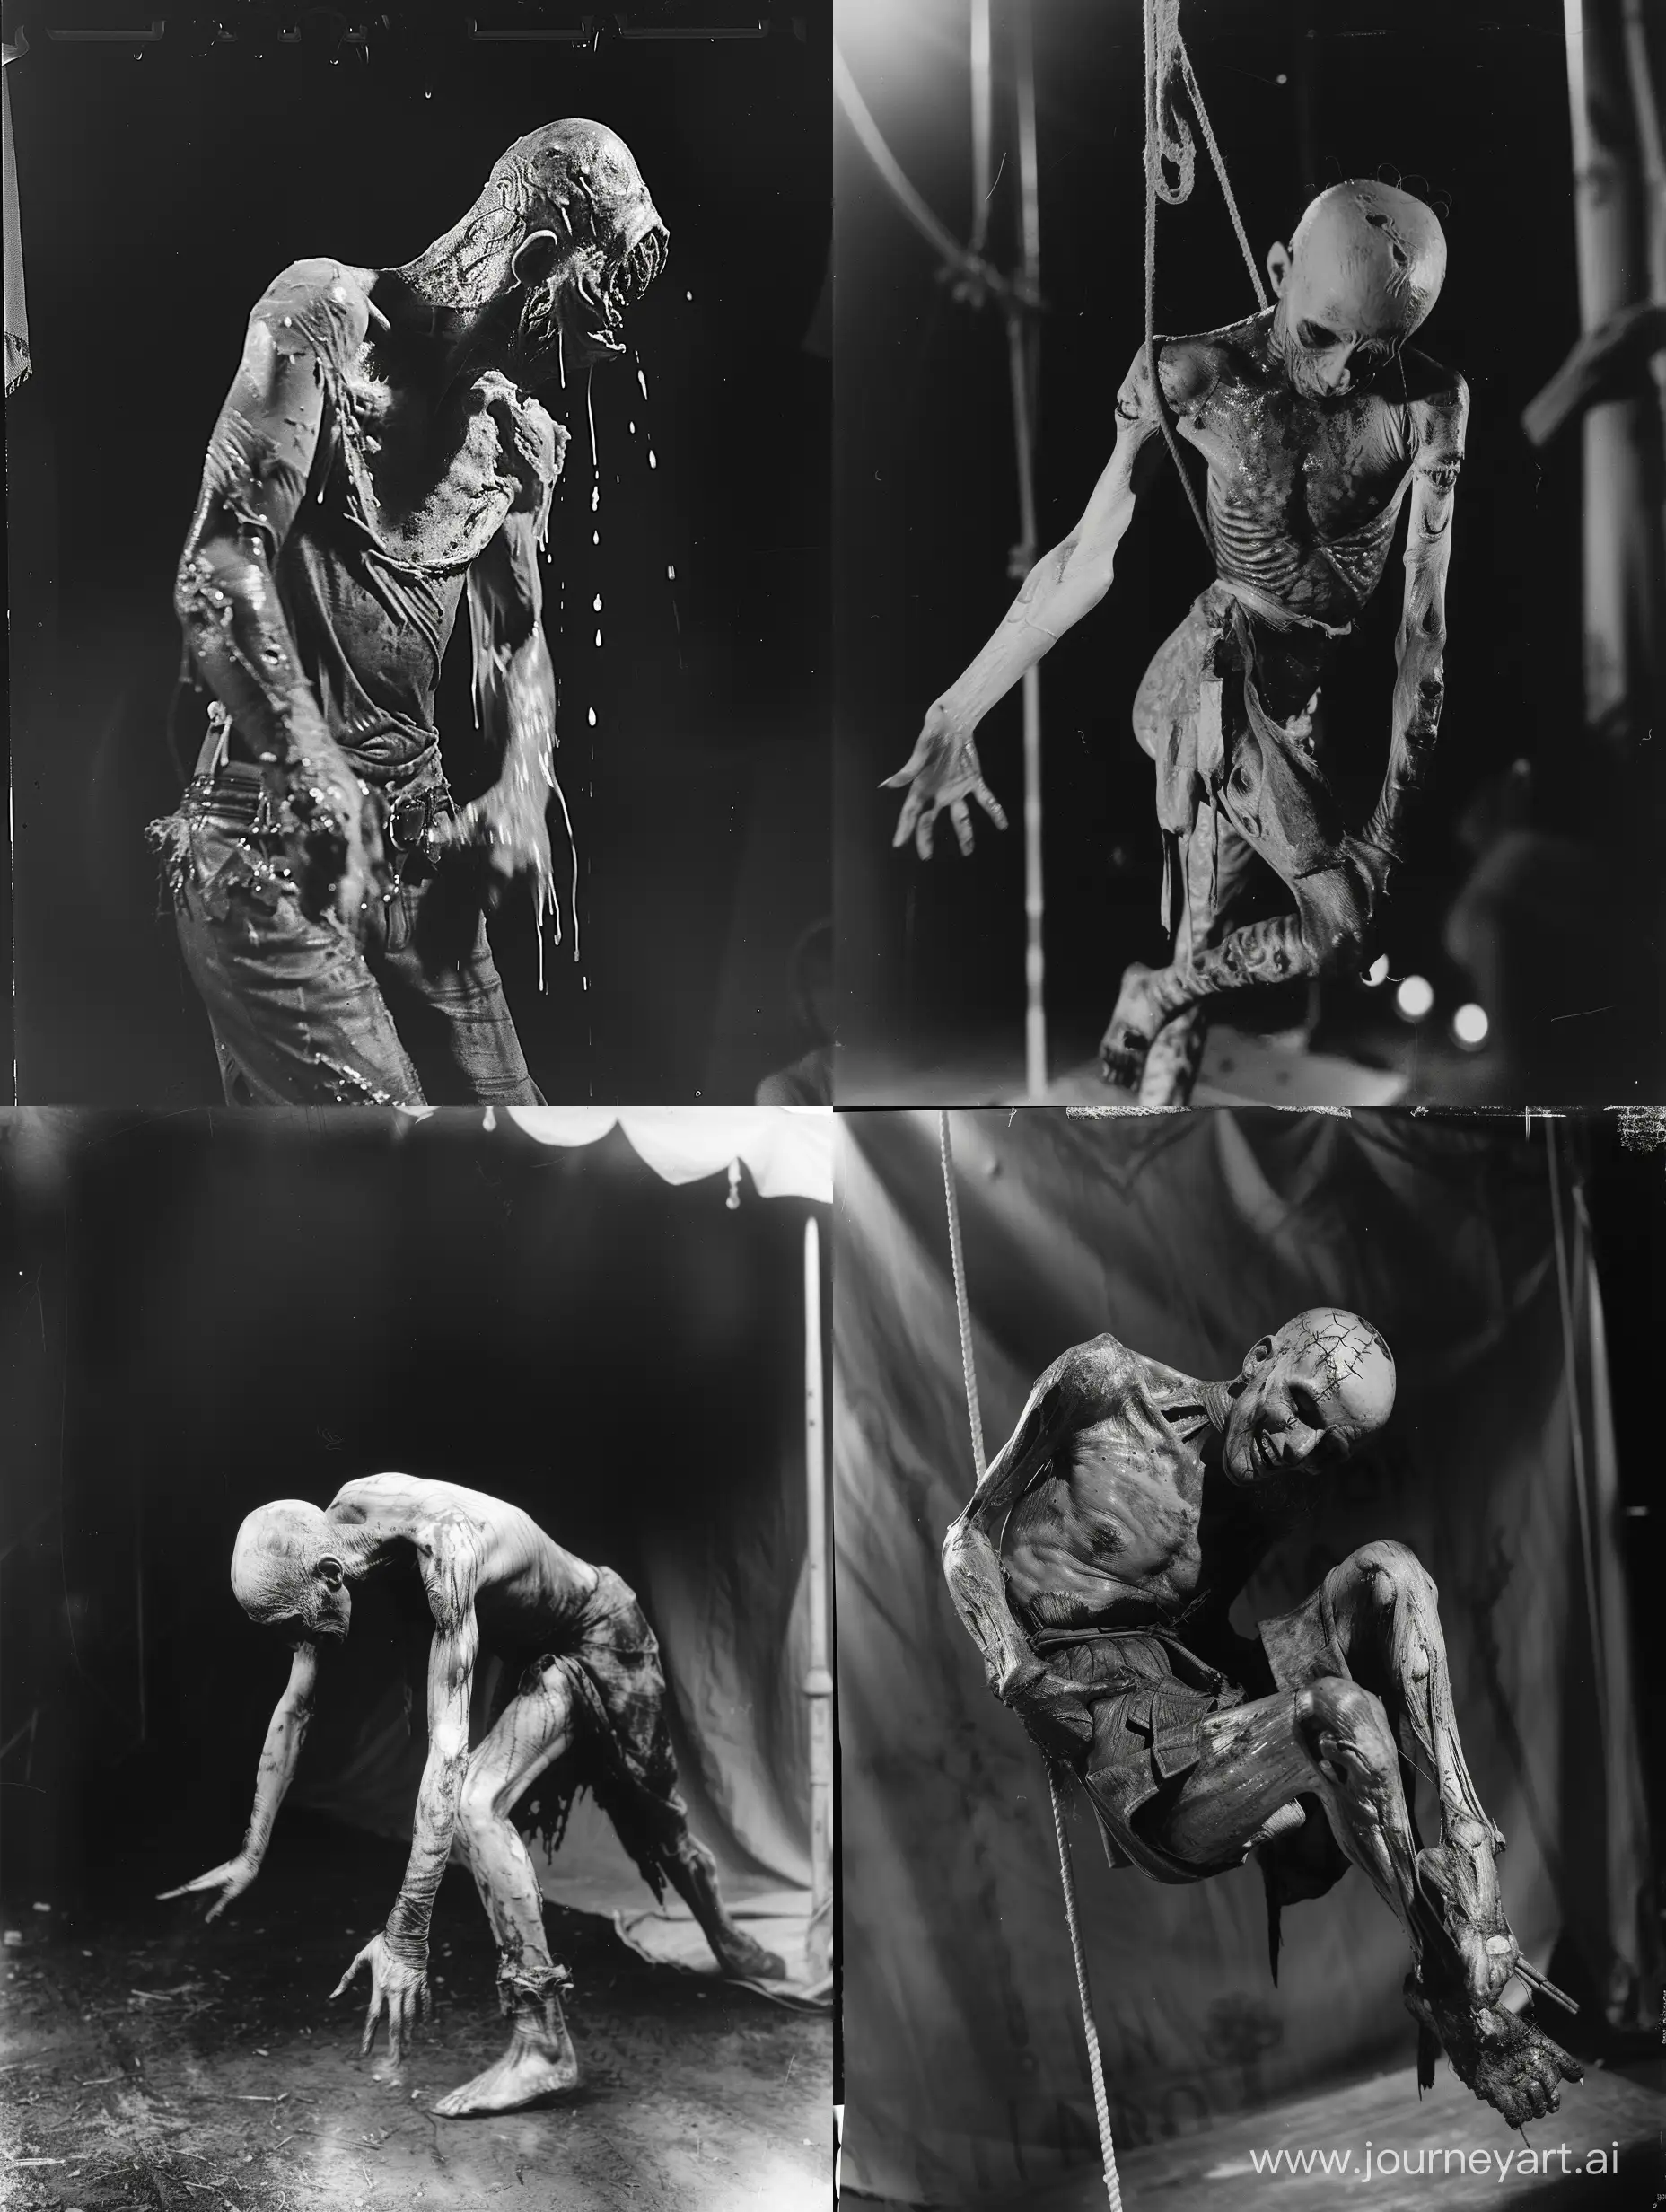 Grotesque-Body-Horror-Circus-Performers-Shocking-Audience-with-Twisted-Physicality